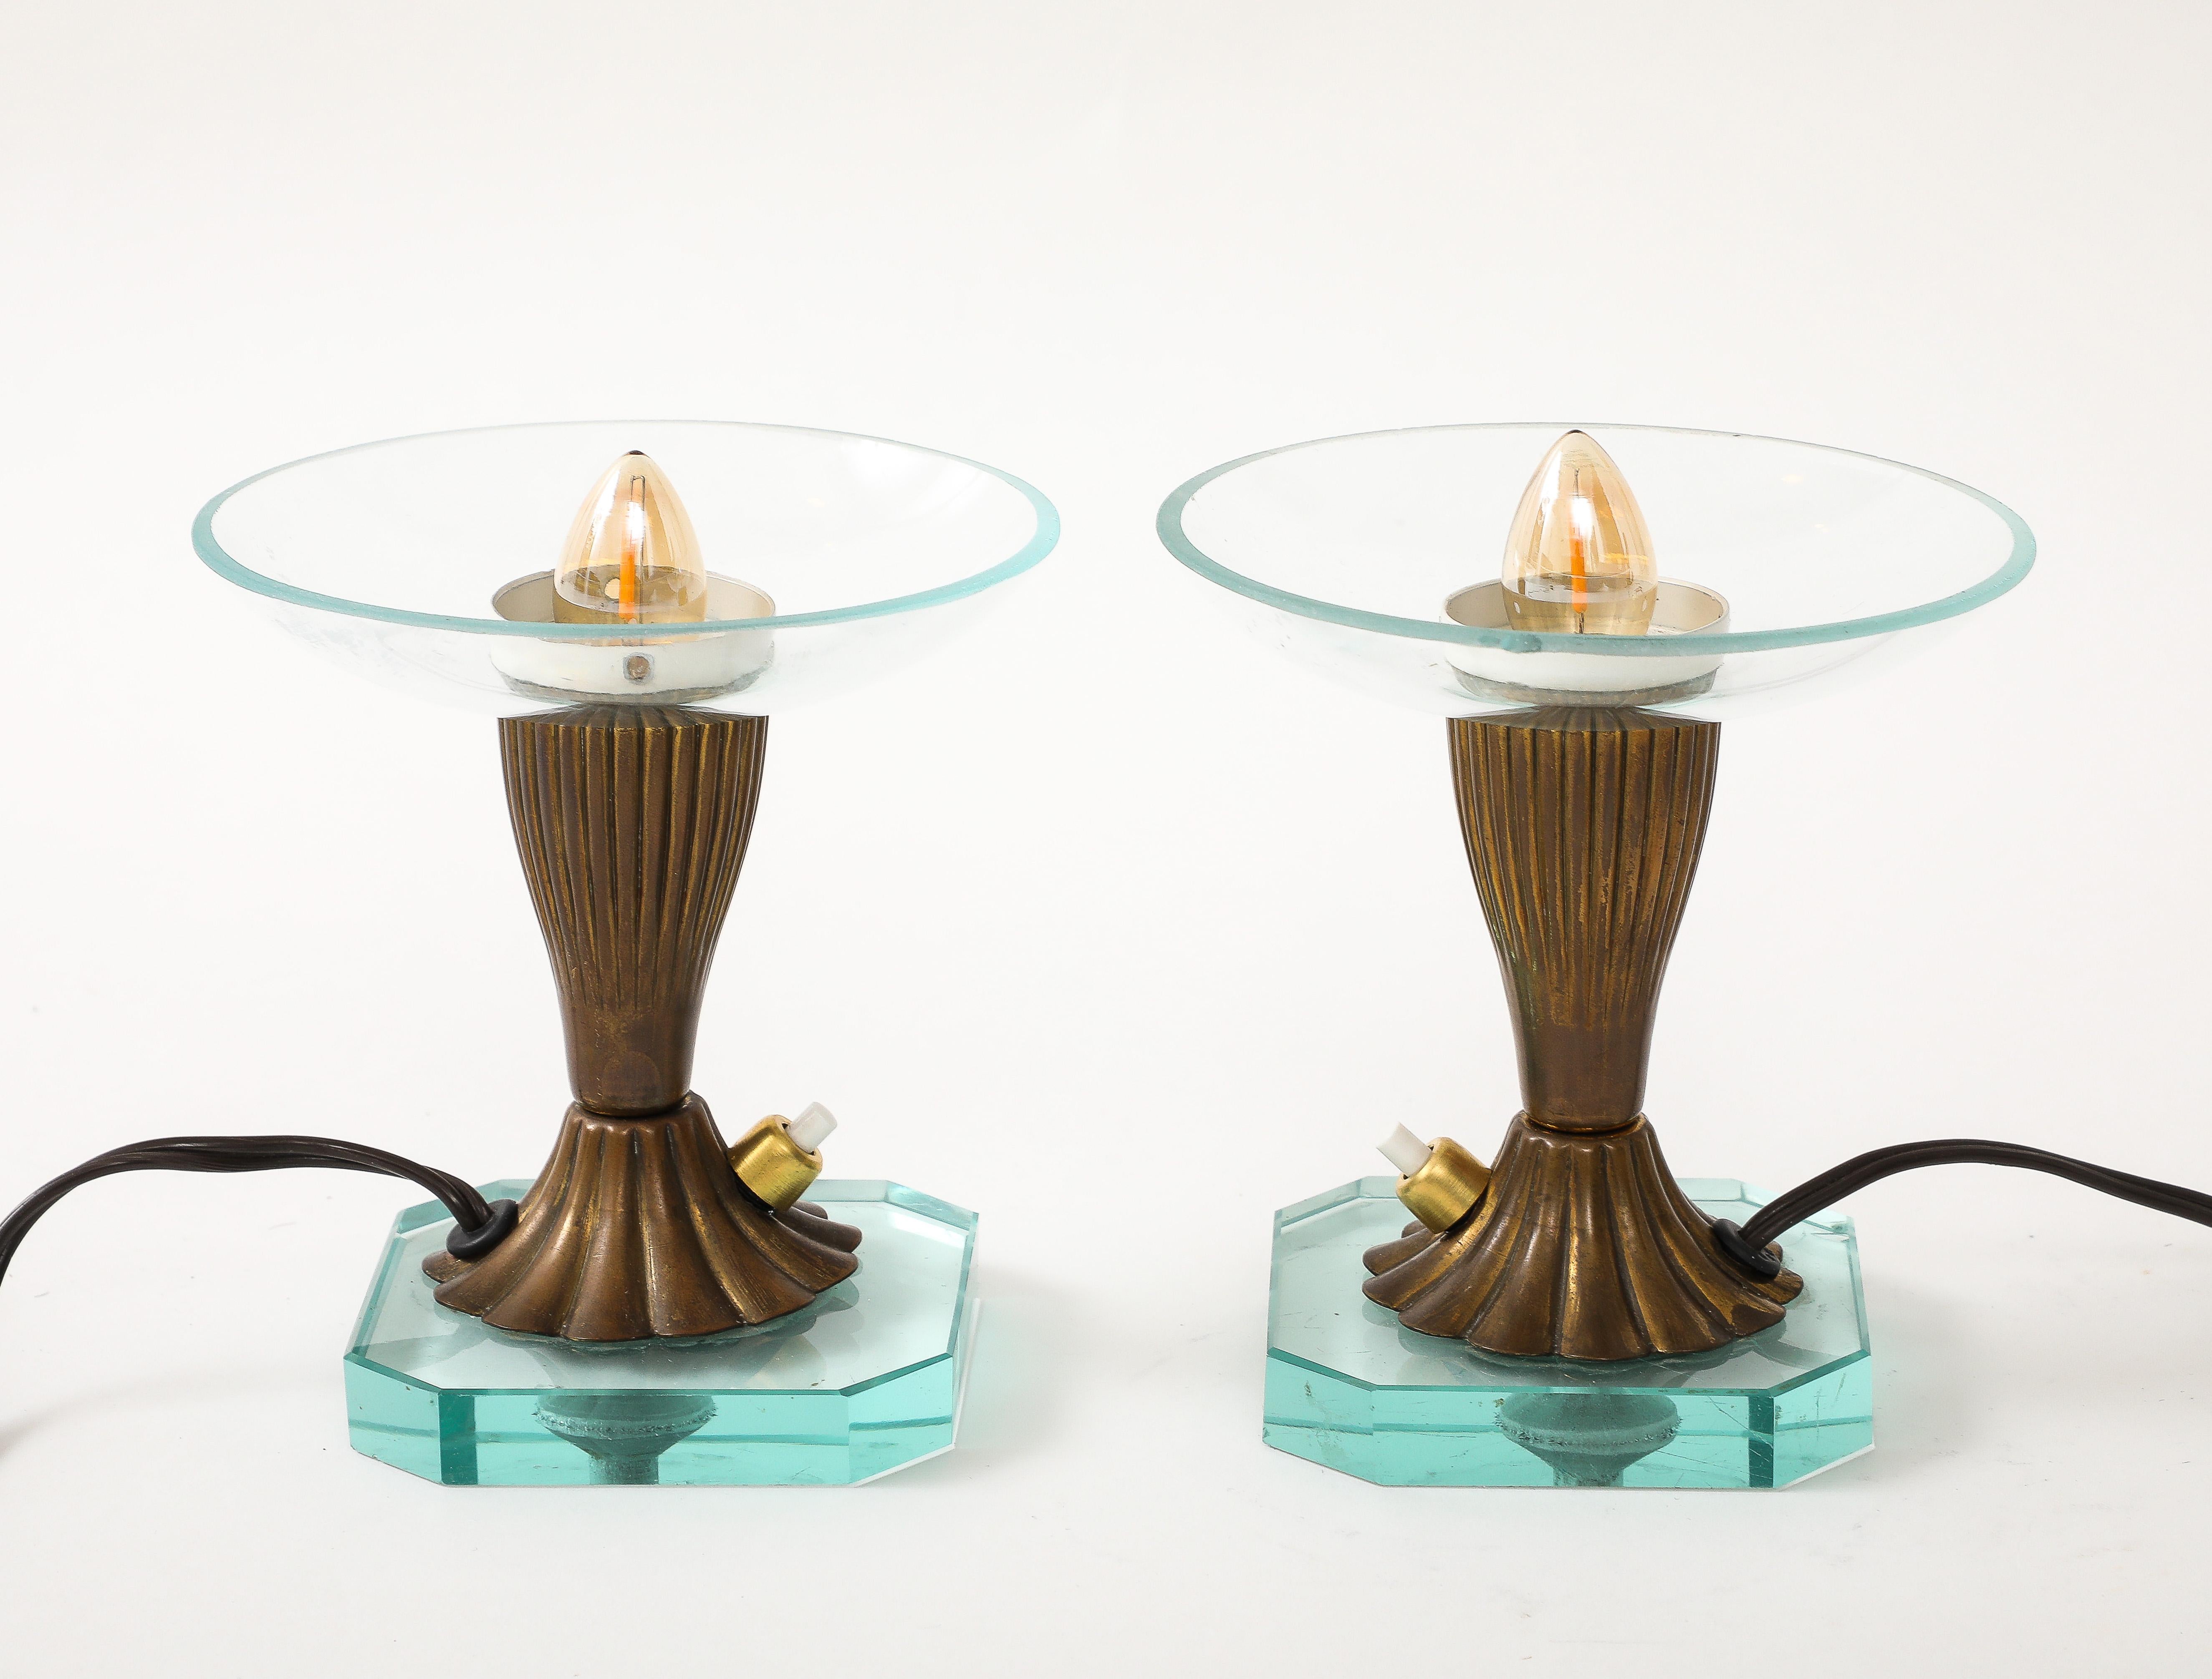 Pair of Glass & Brass Petite Table Lamps att. Pietro Chiesa - Italy 1940's For Sale 2